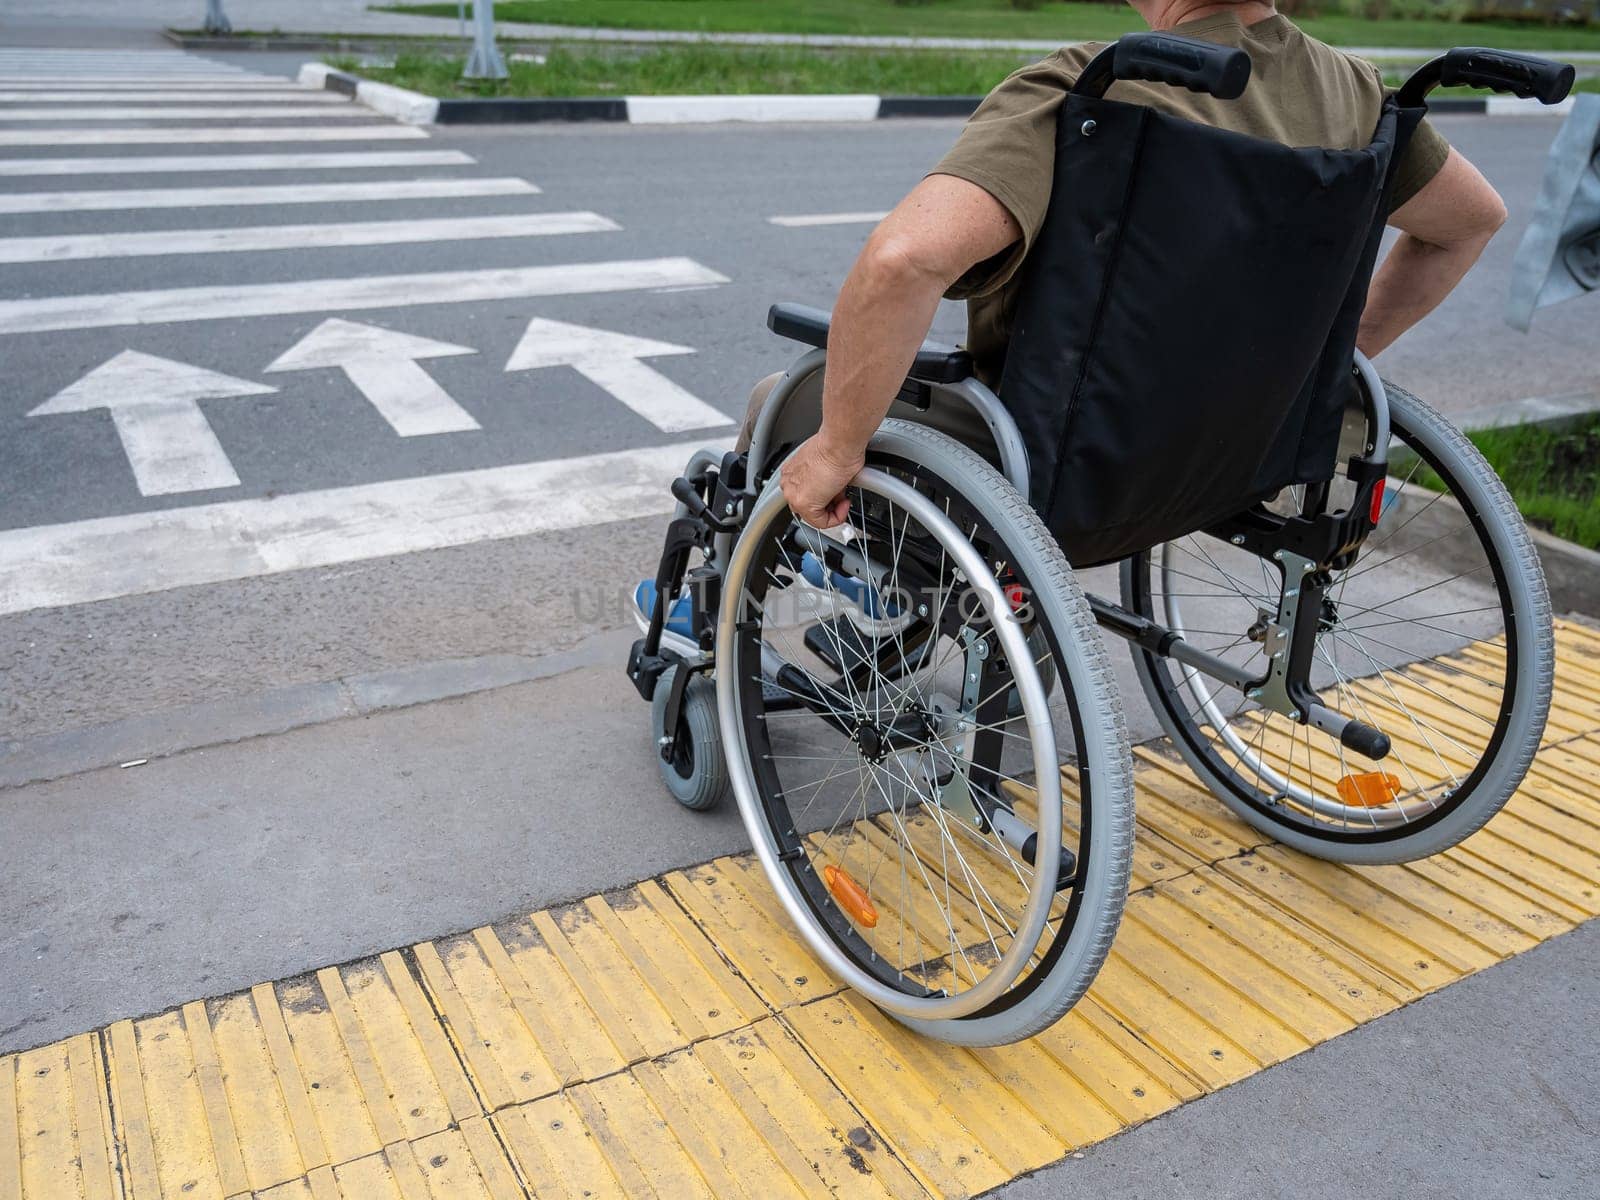 Rear view of an elderly woman in a wheelchair going to a pedestrian crossing. Close-up on wheels